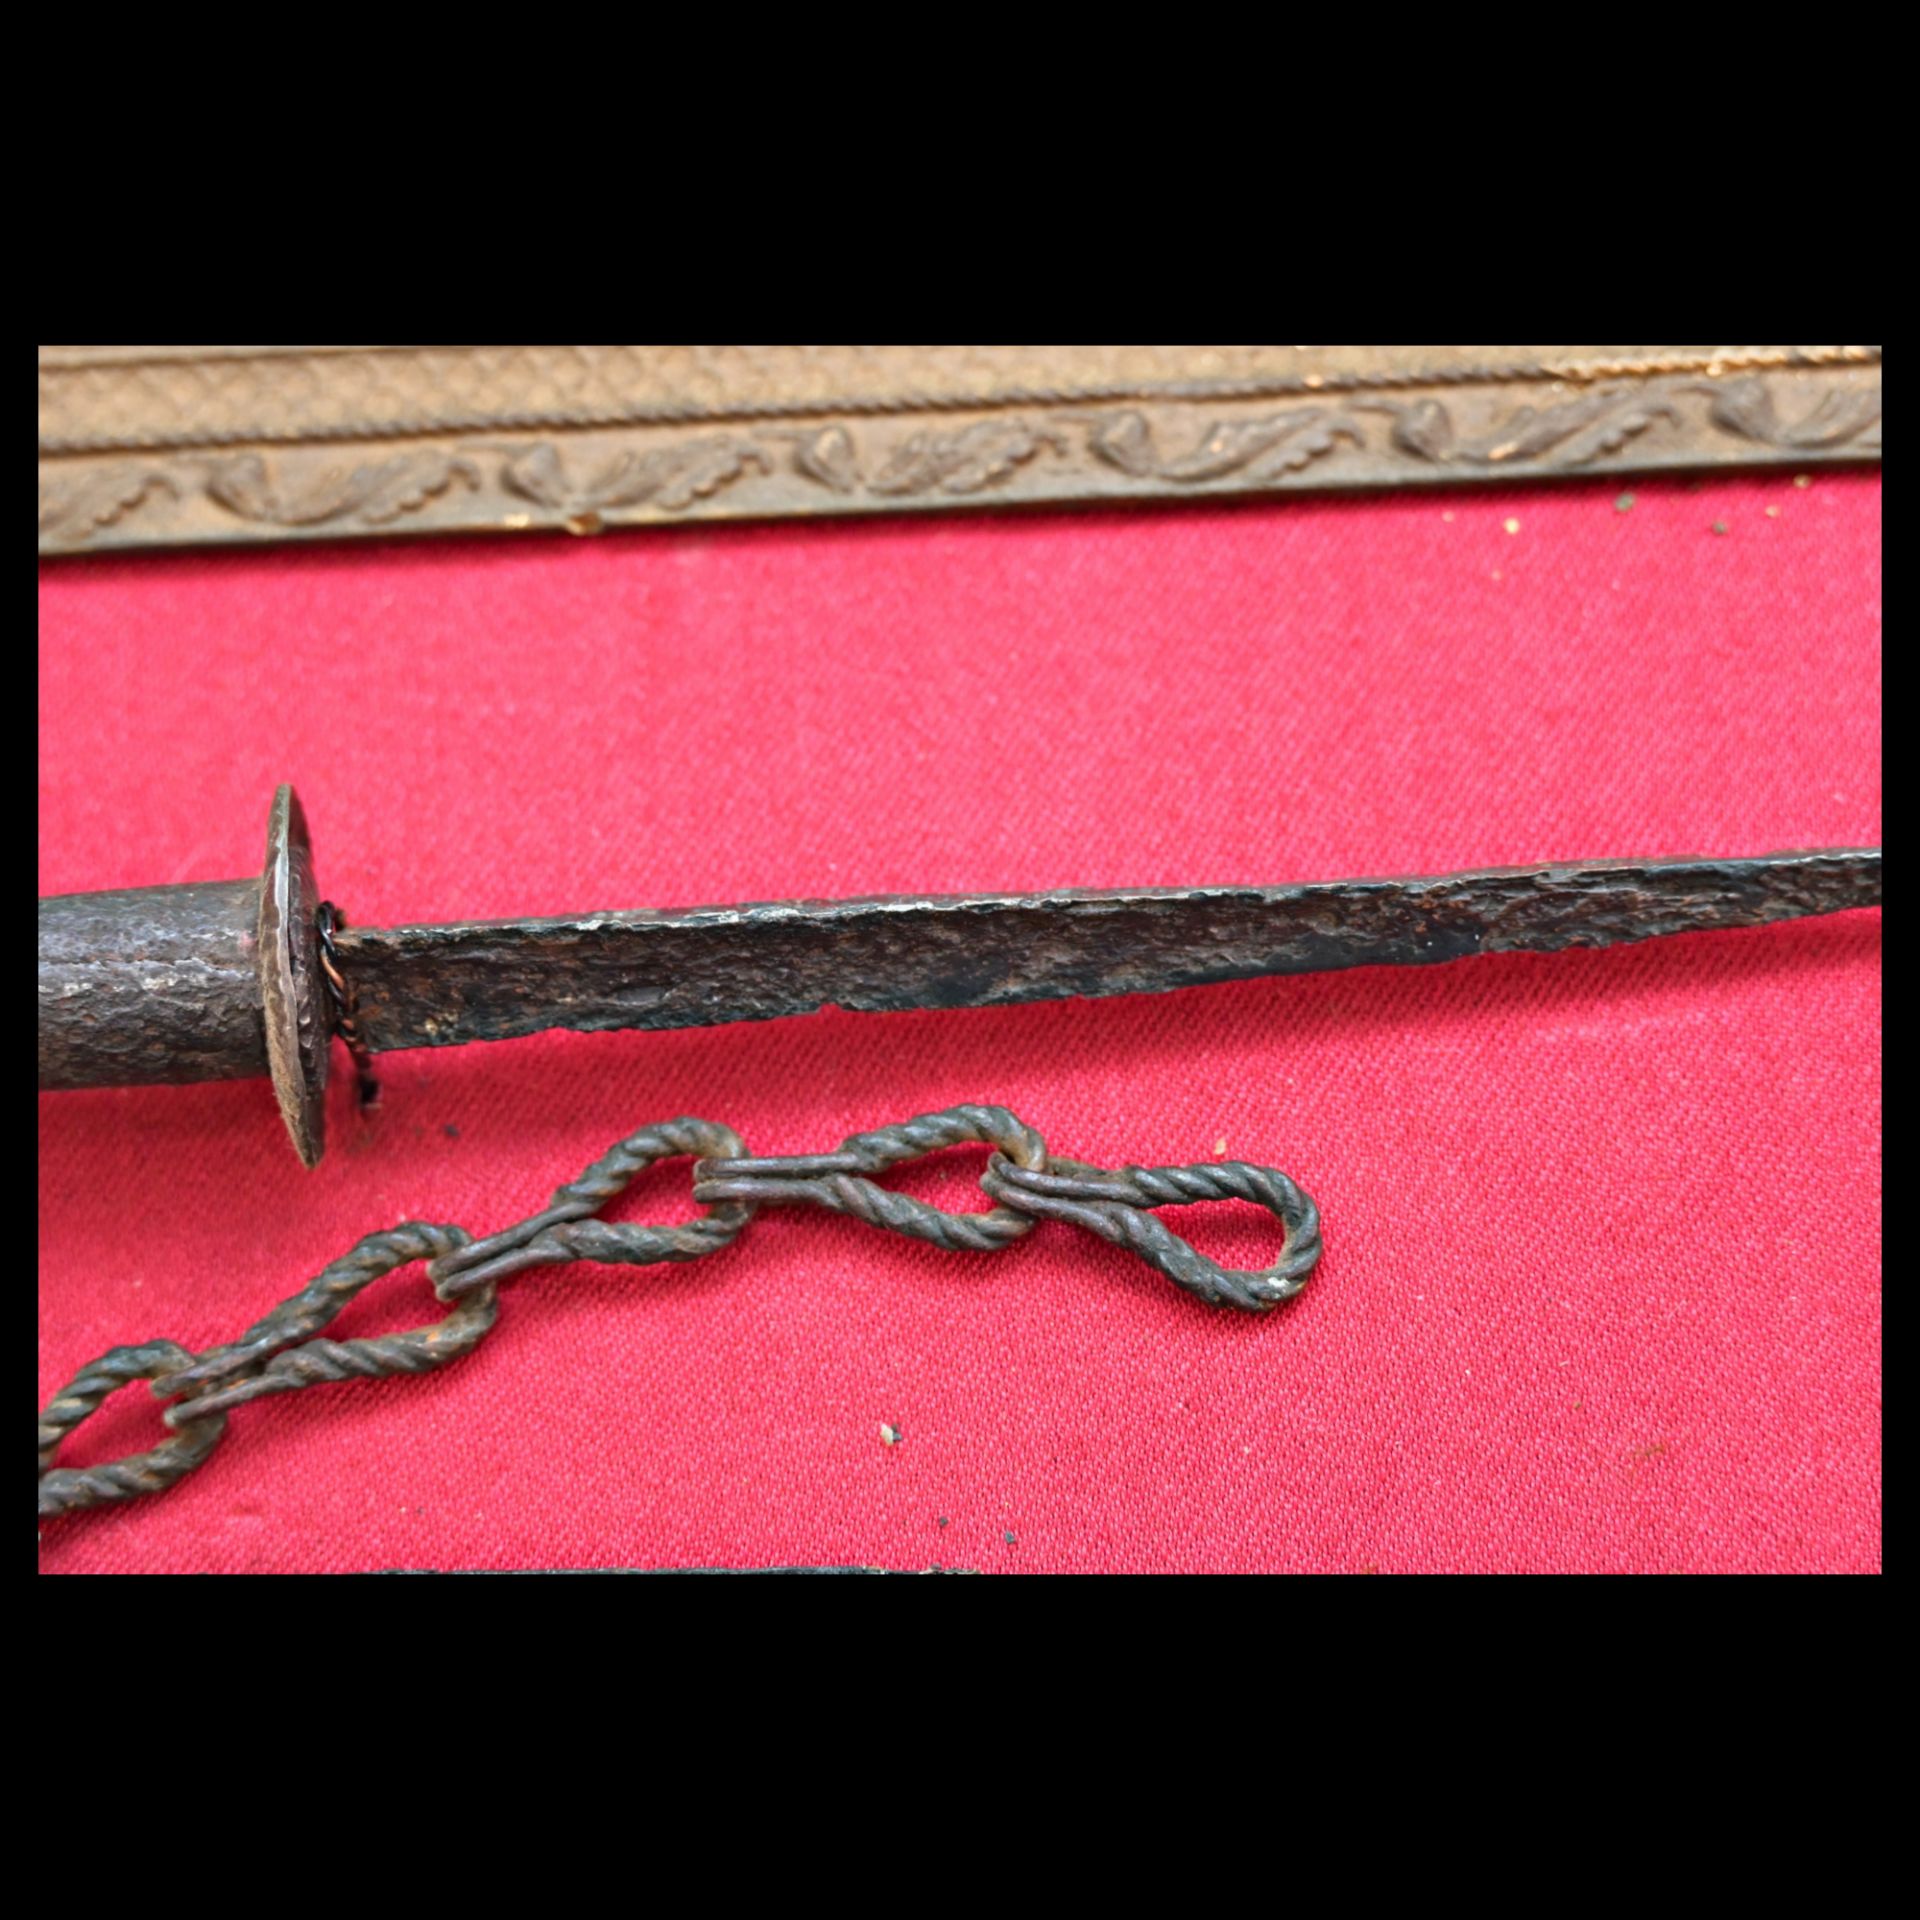 A very rare Medieval Western Europe rondel dagger with wooden grip and scabbard details 14th-15th C. - Image 3 of 7